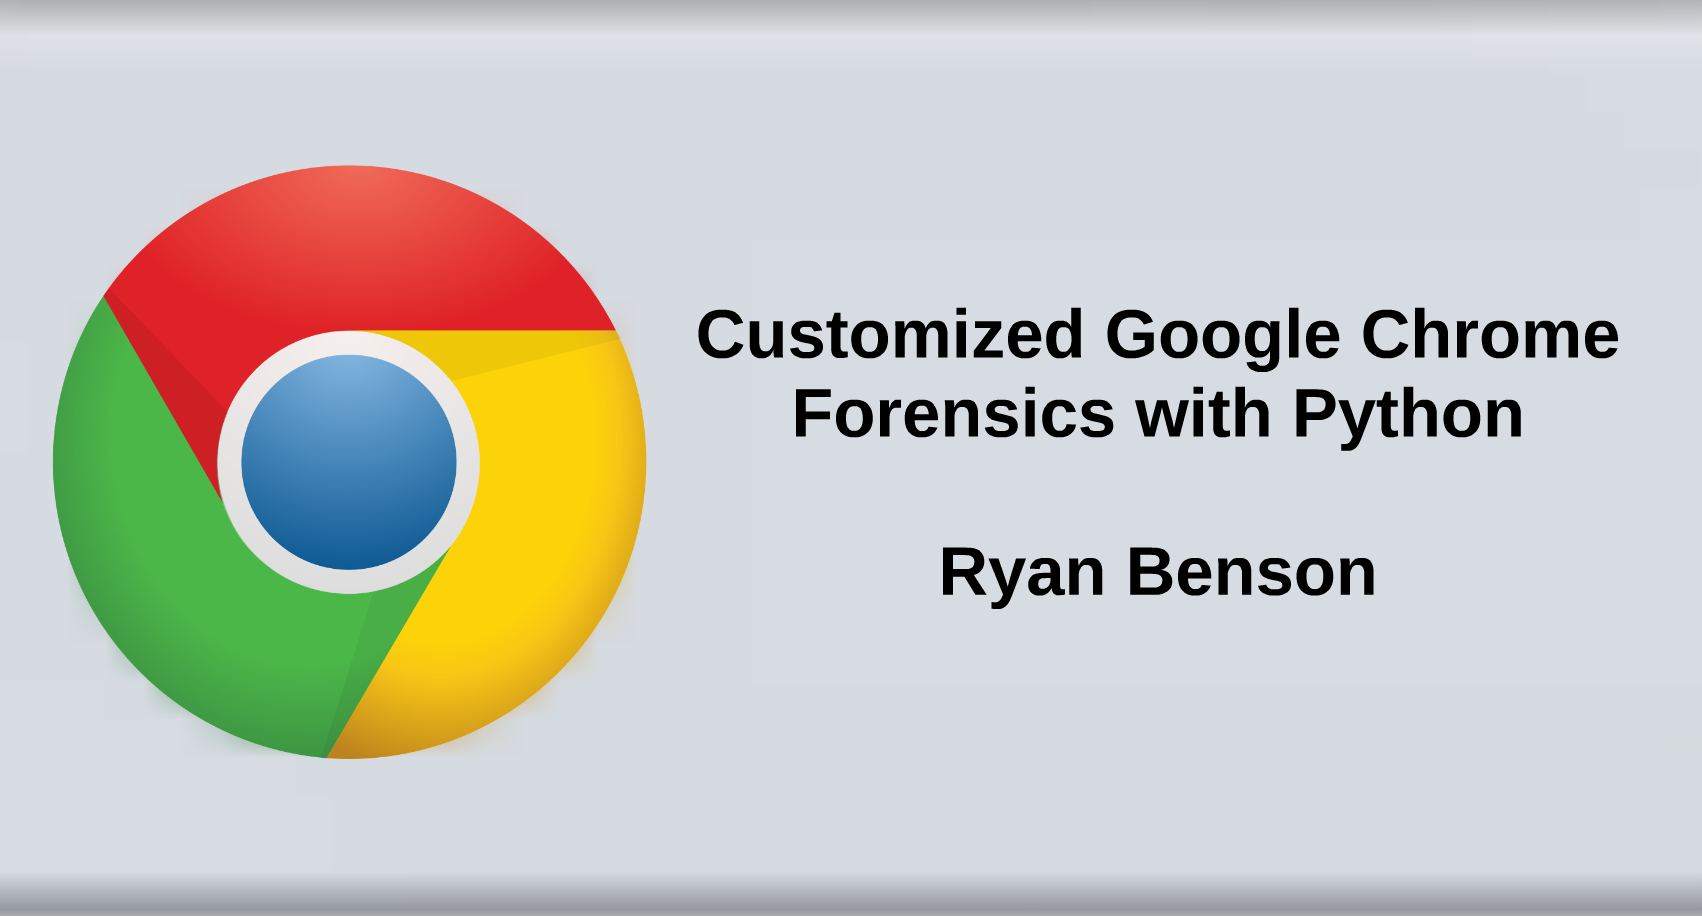 Video of "Customized Google Chrome Forensics with Python" at SANS DFIR Summit 2015